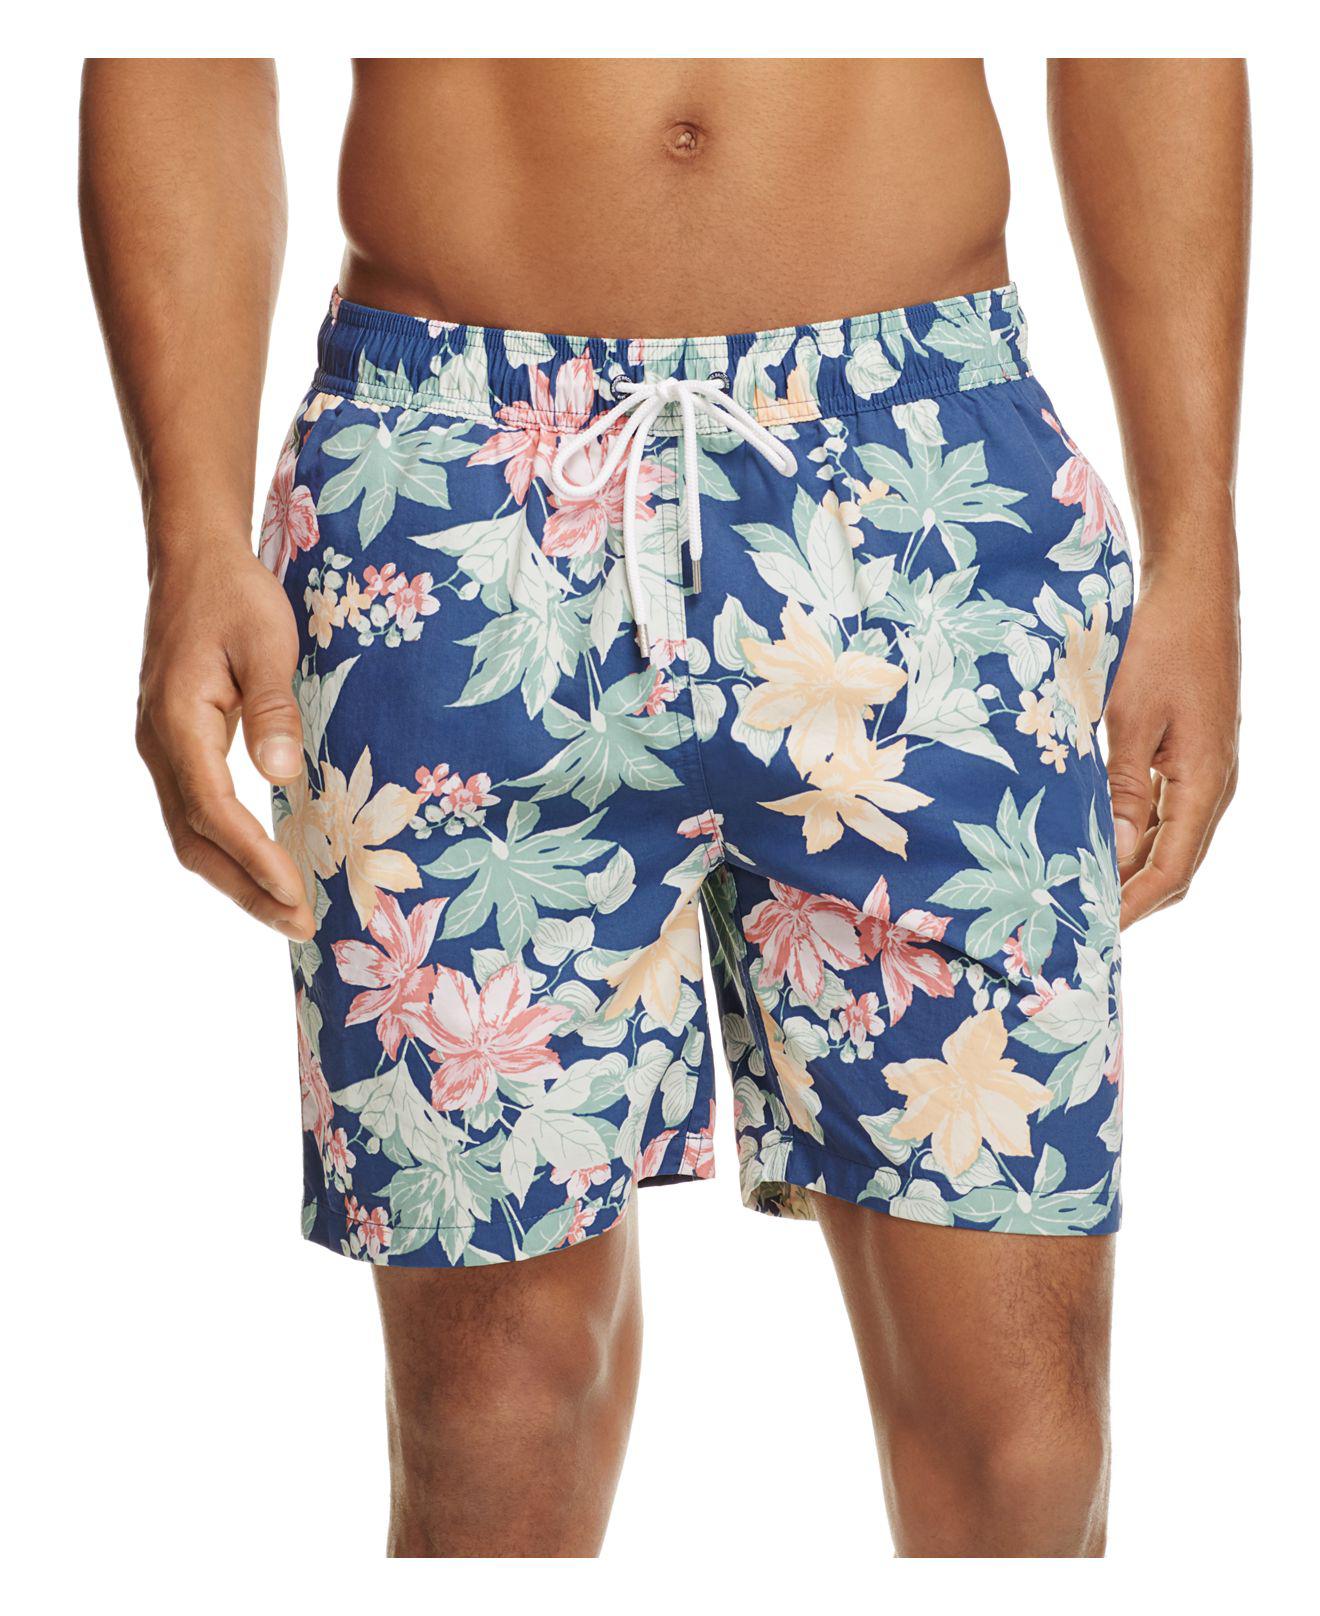 Lyst - Brooks Brothers Tropical Print Swim Trunks in Blue for Men